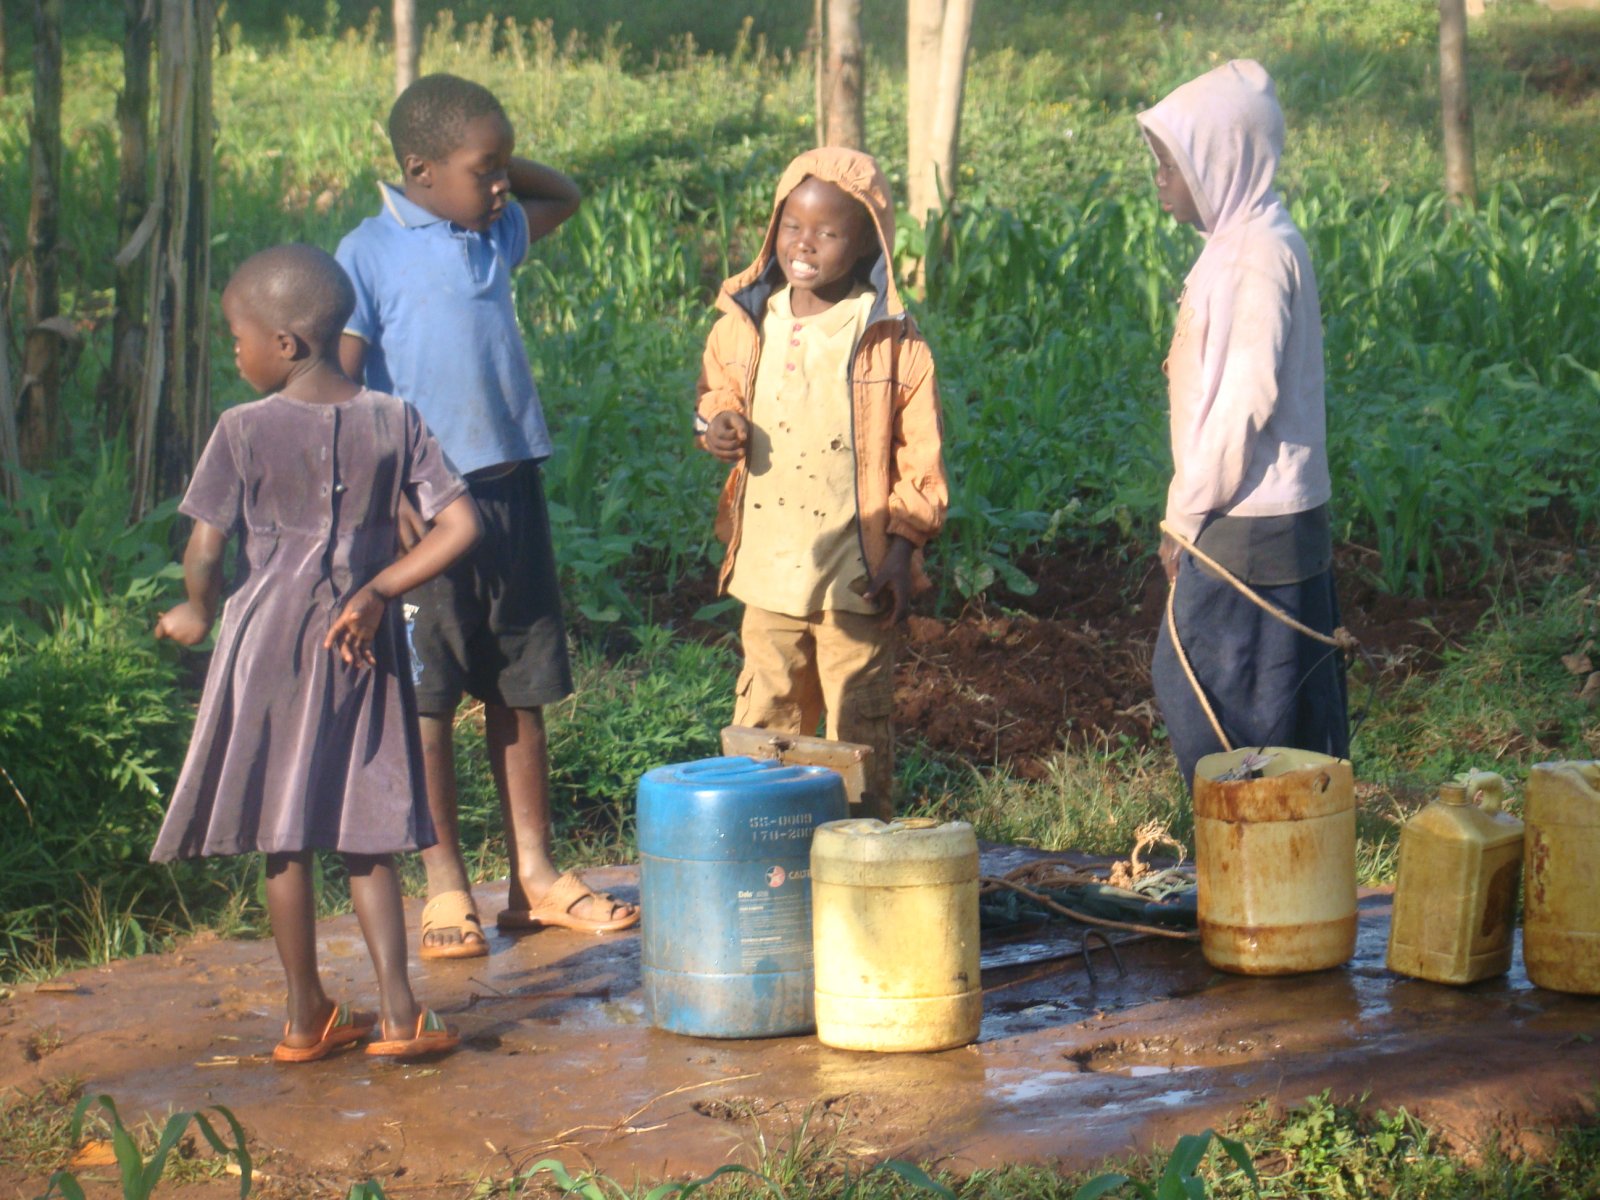 Children fetching water at a community borehole in Gamoi Village, Vihiga County.